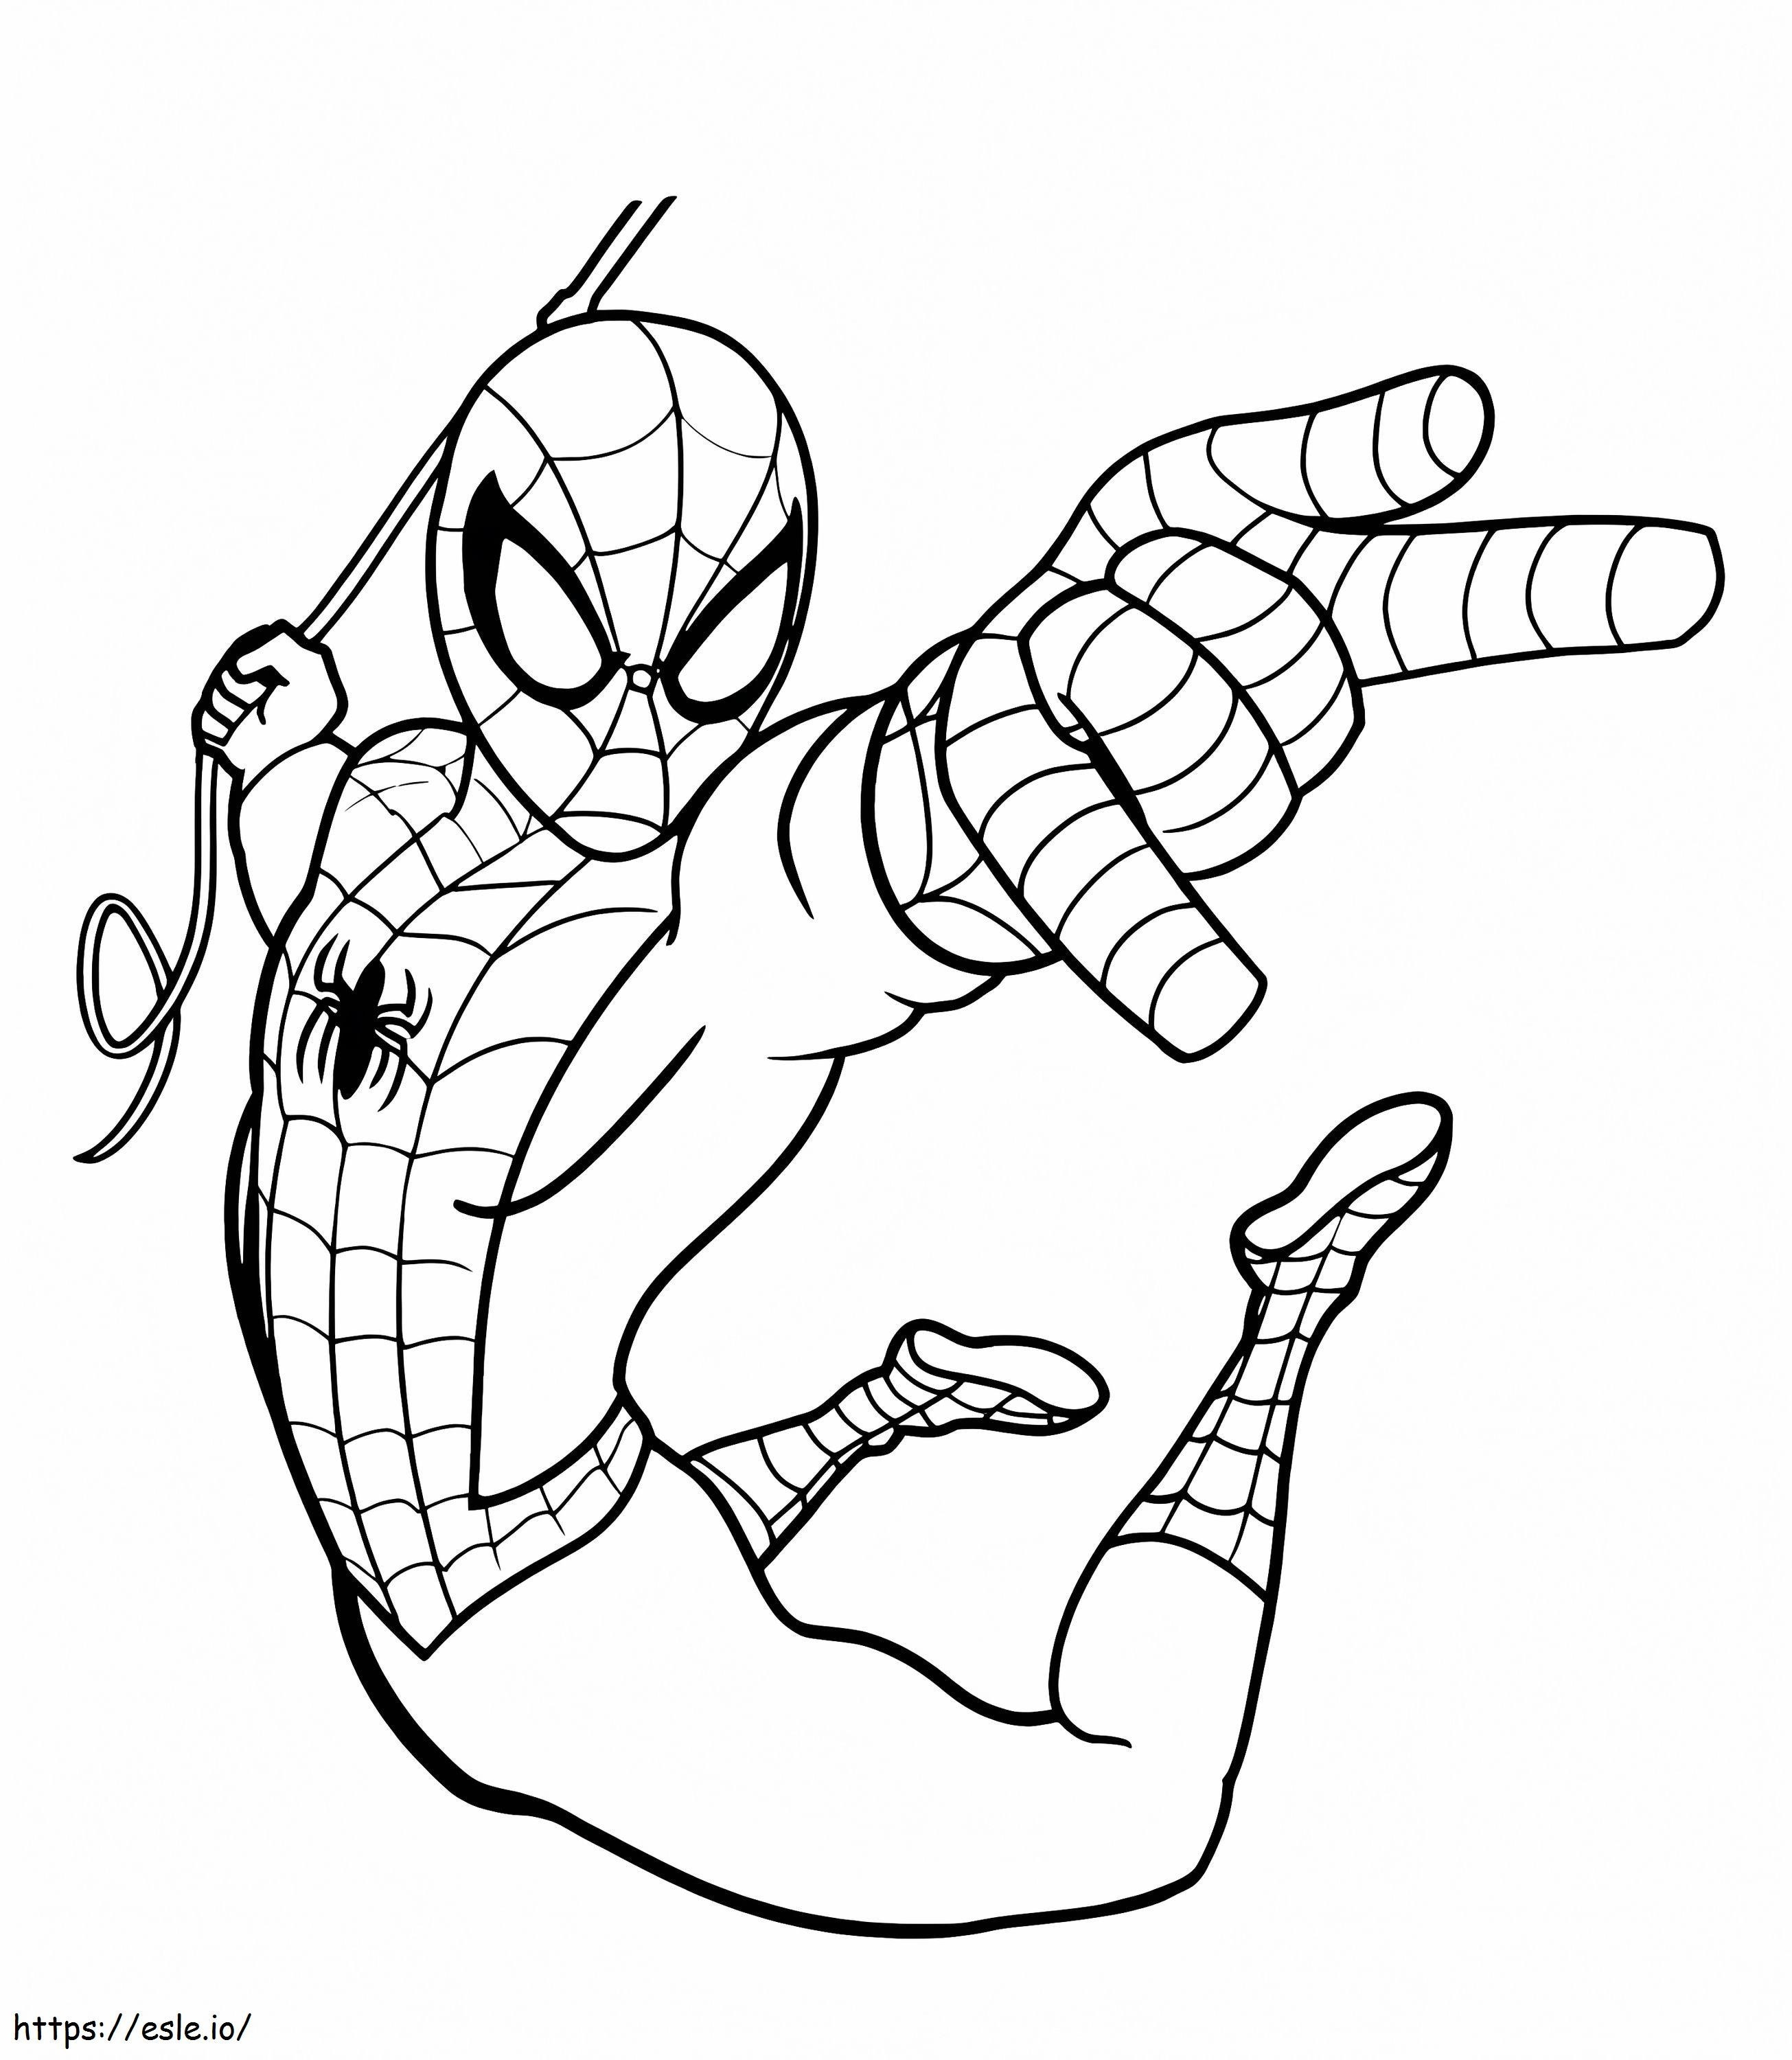 Perfect Spiderman coloring page